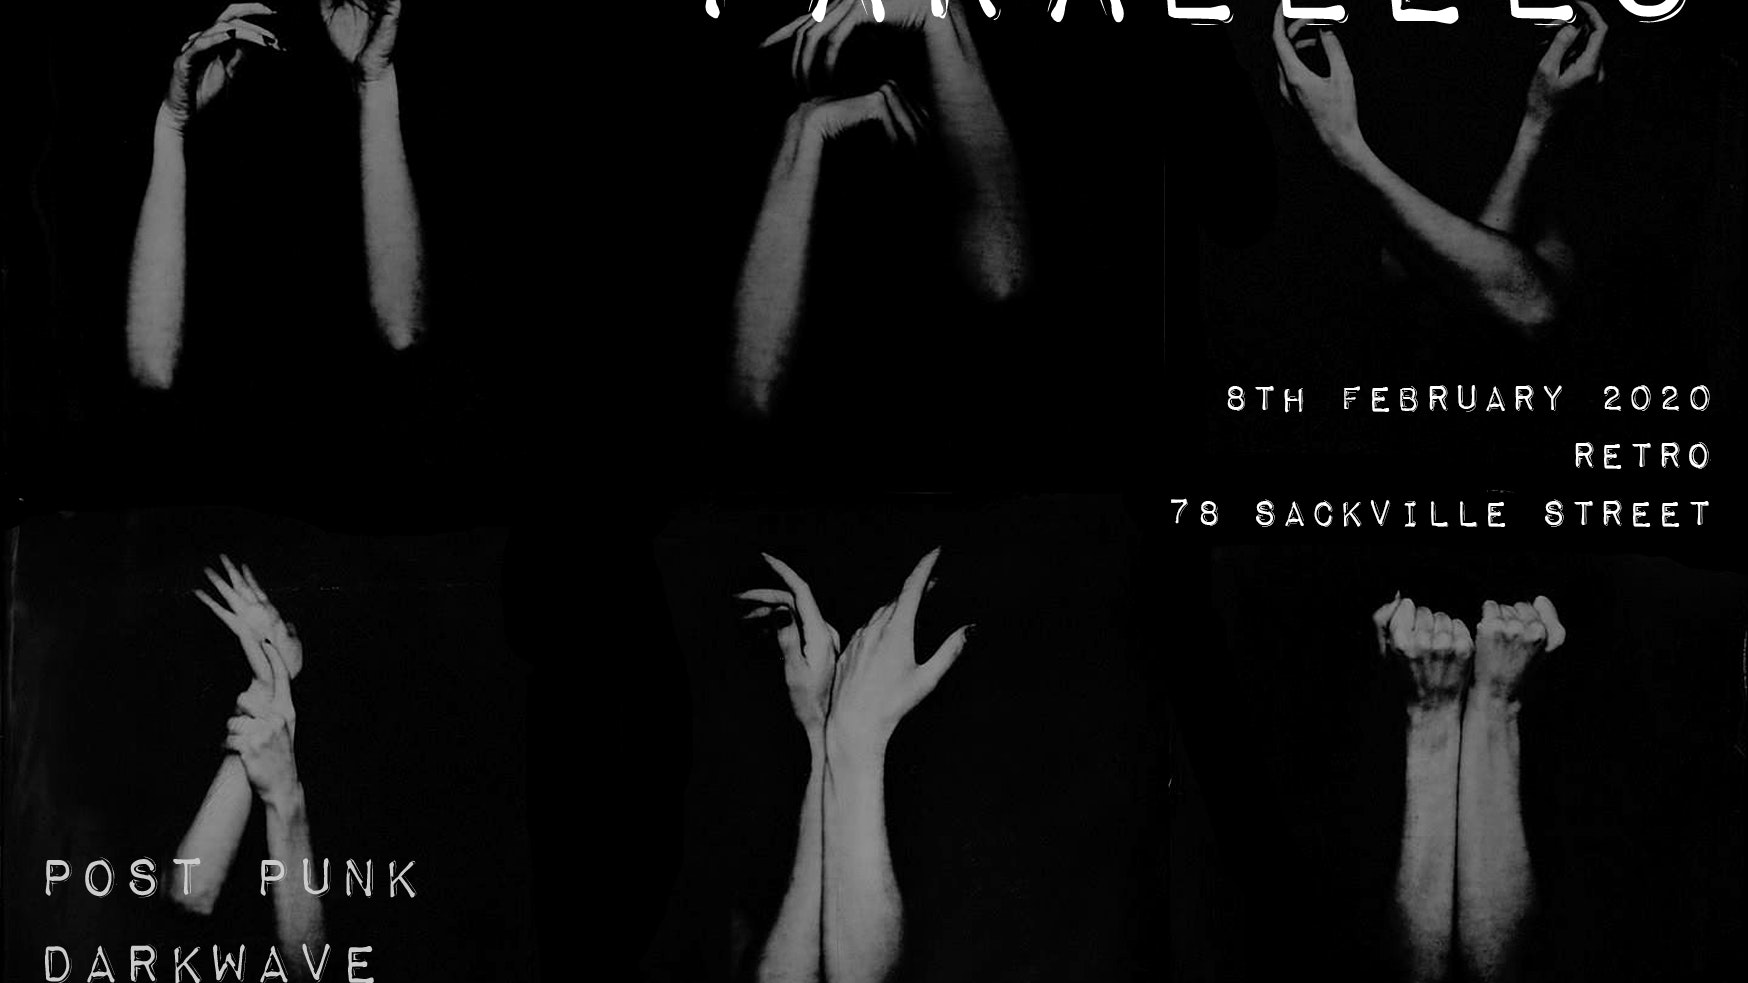 PΛRΛLLELS presents: one night of post punk, darkwave & synth